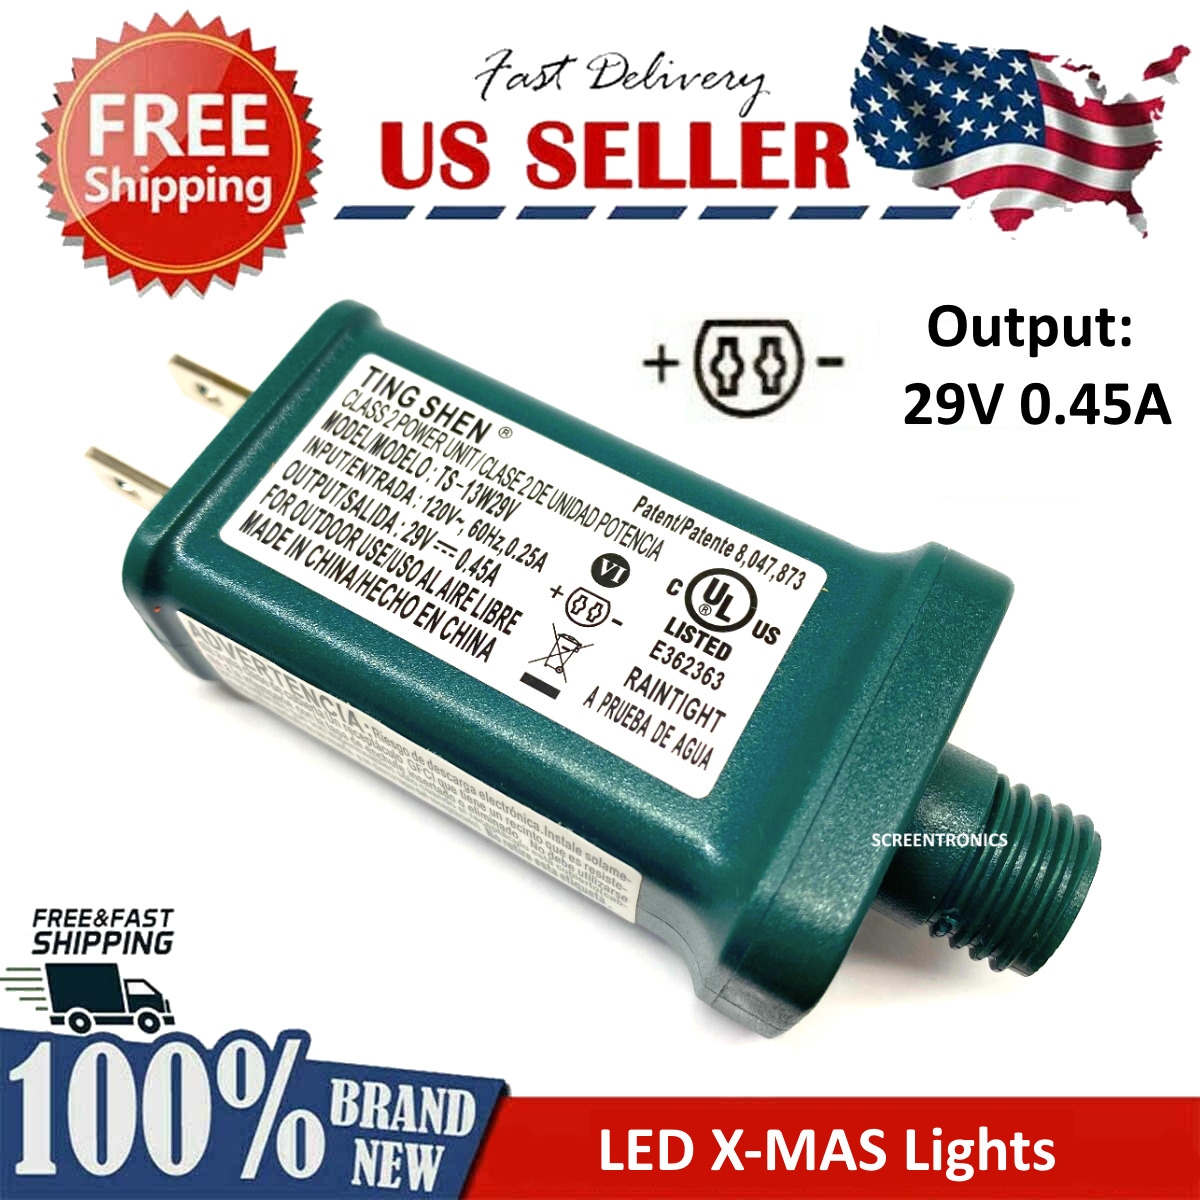 Replacement Power Supply for LED Xmas Tree Lights DC 29V 0.45A - TS-13W29V